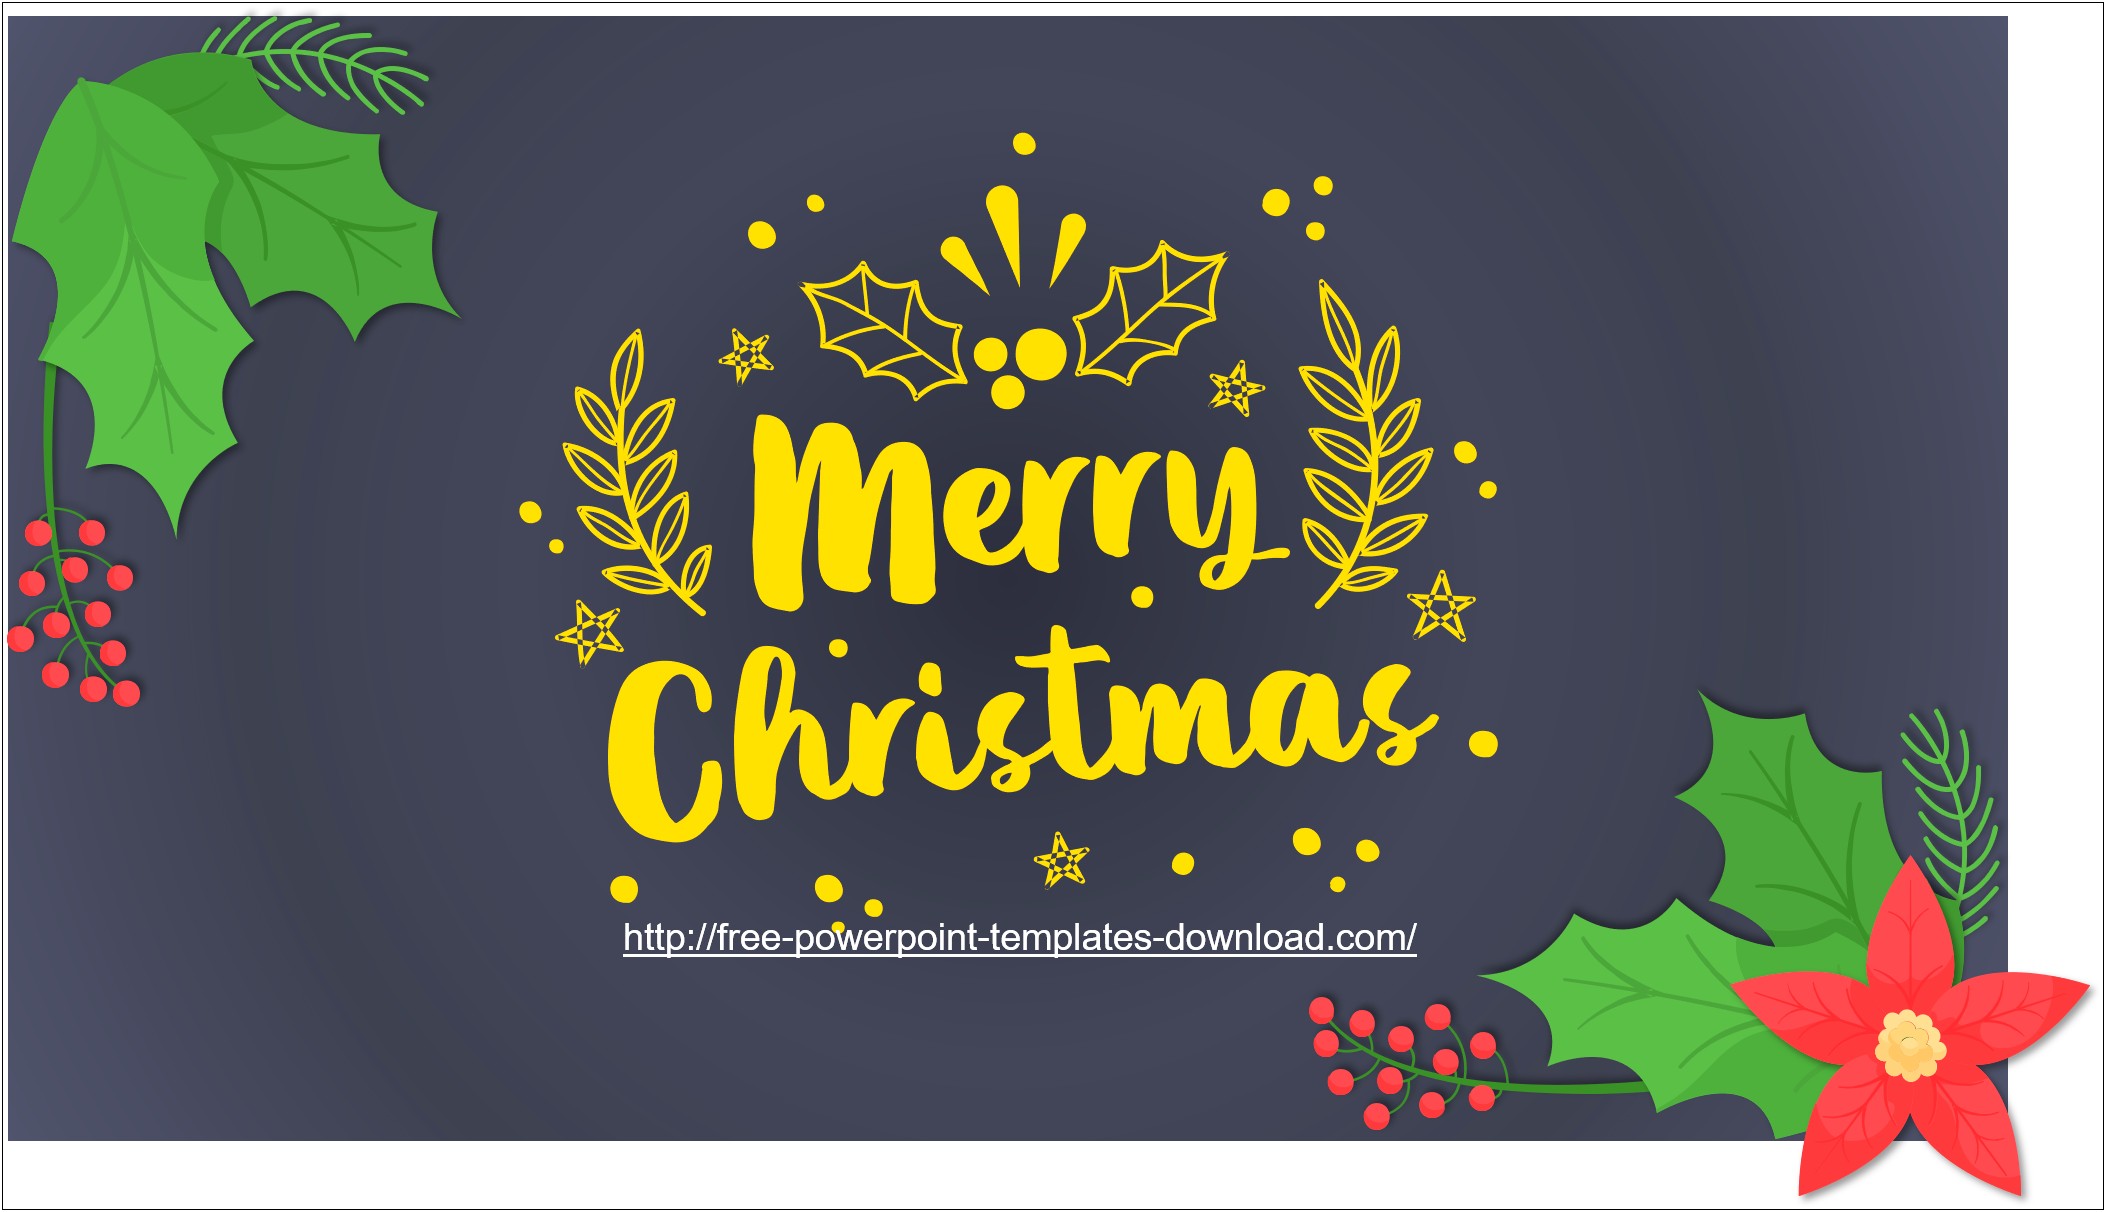 Free Christmas Powerpoint Templates With Music